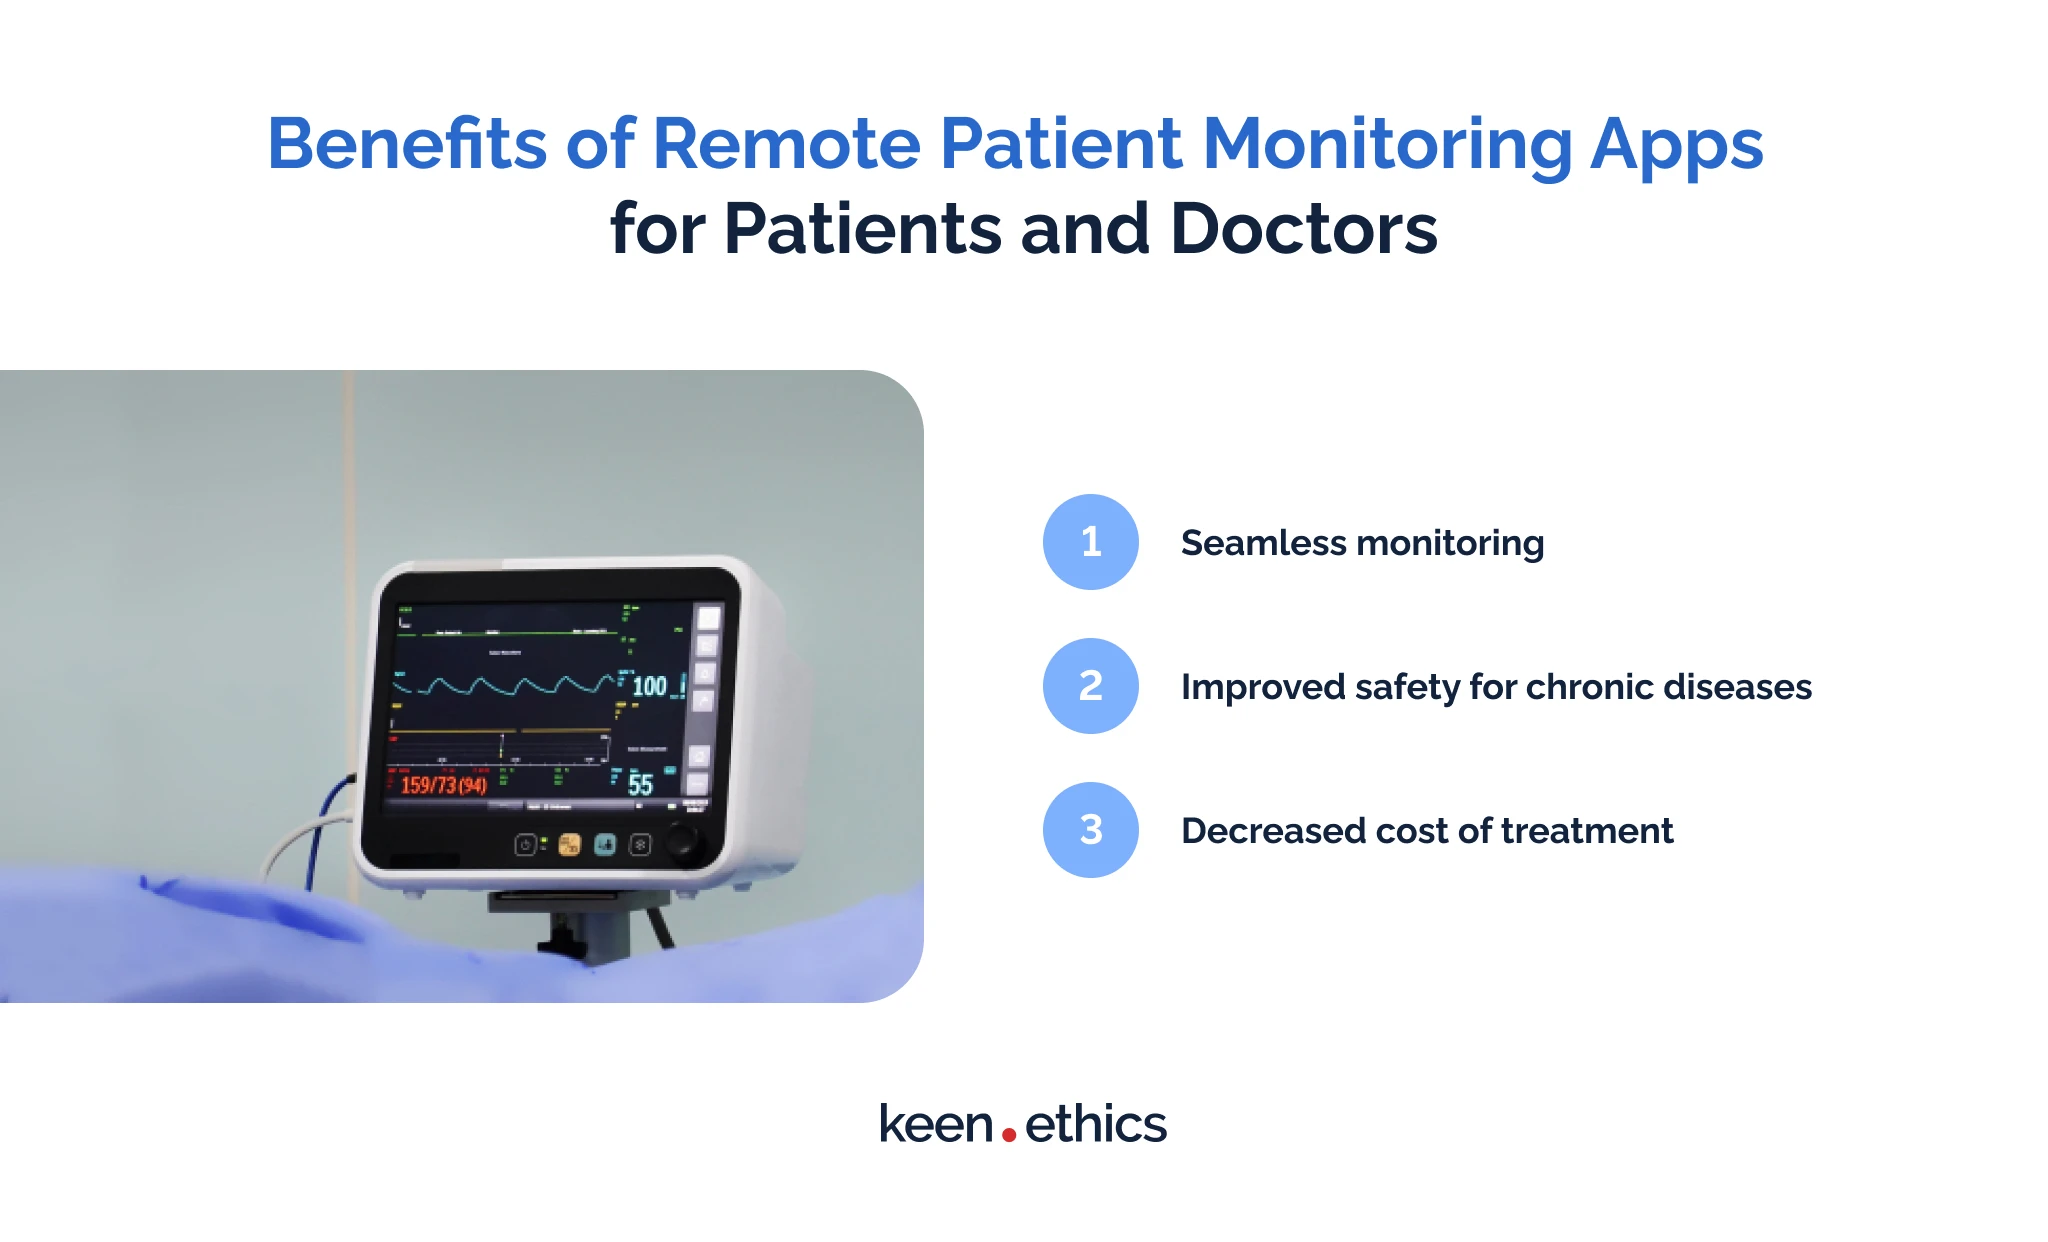 Benefits of remote patient monitoring apps for patients and doctors